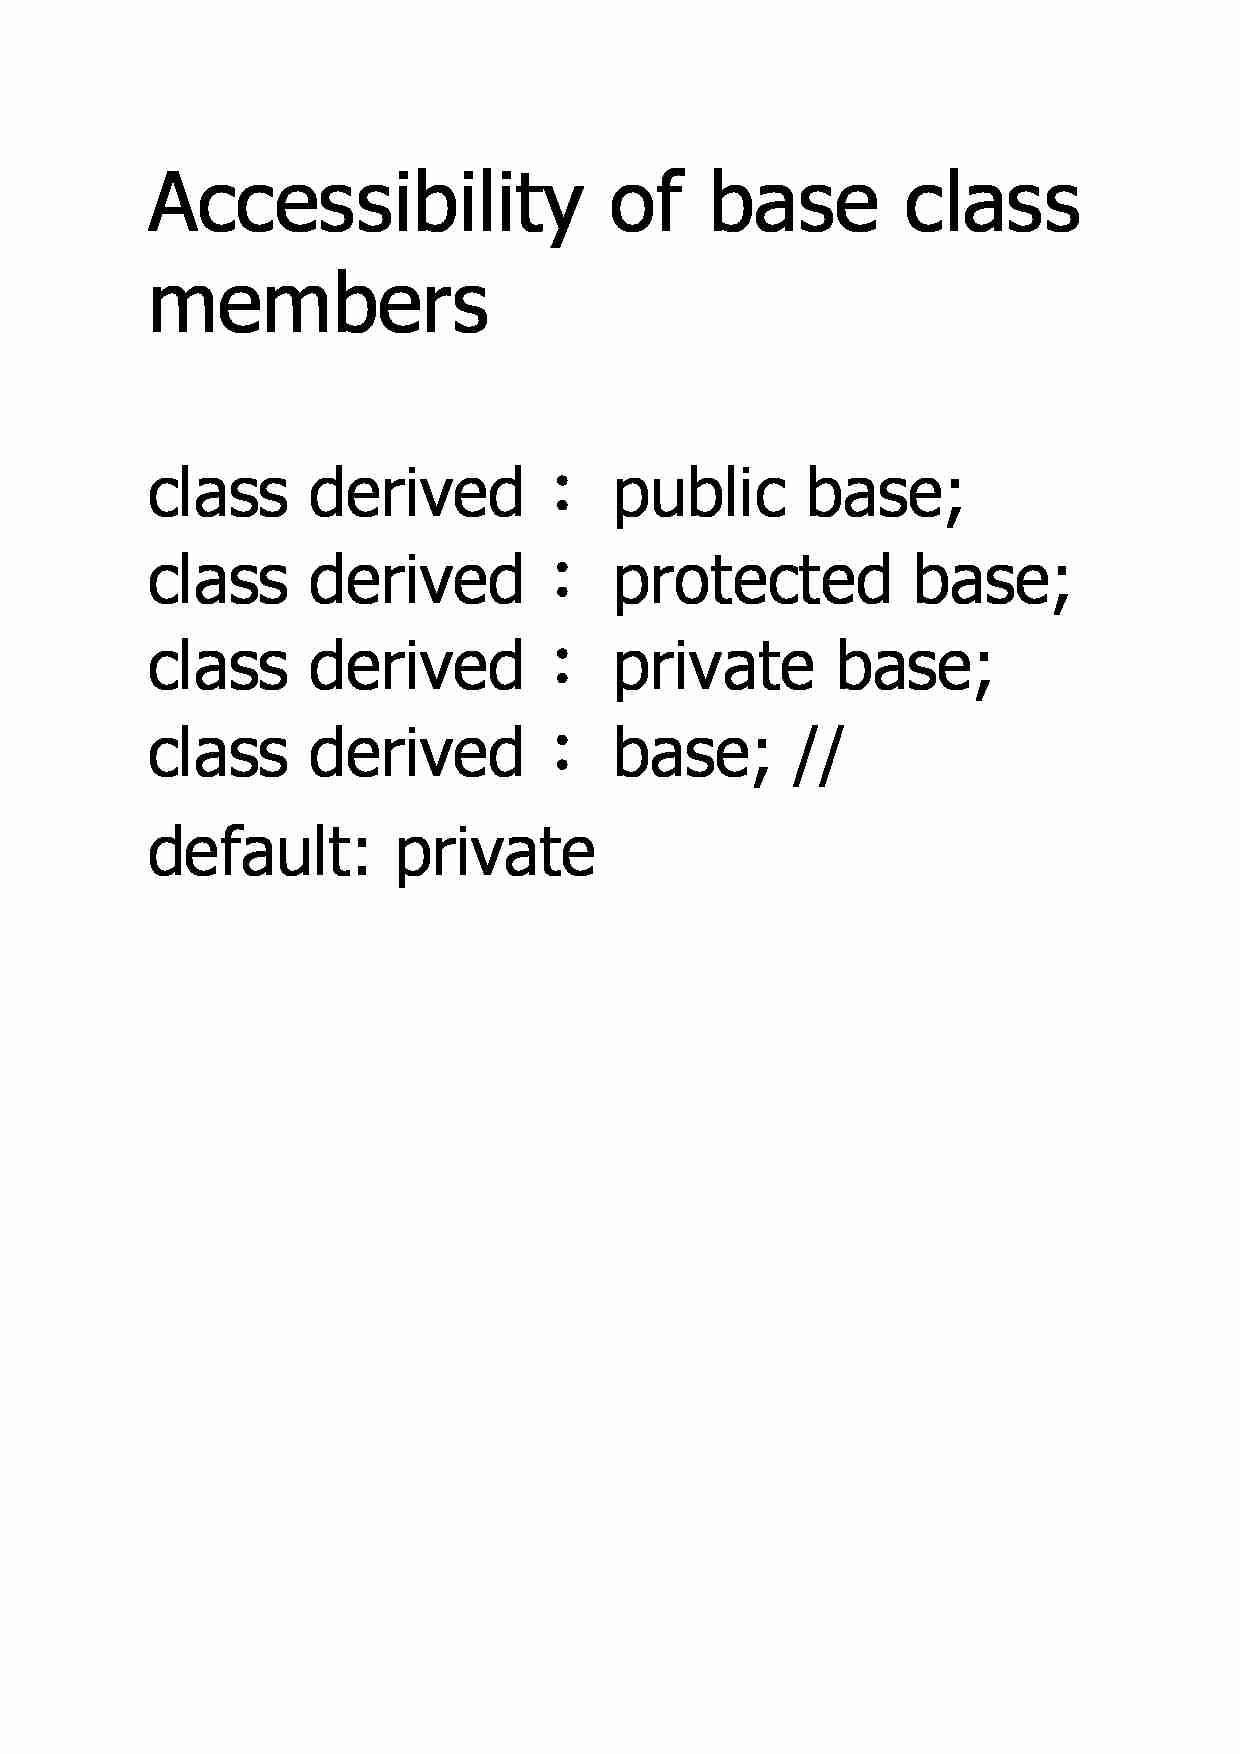 Accessibility of base class members - strona 1